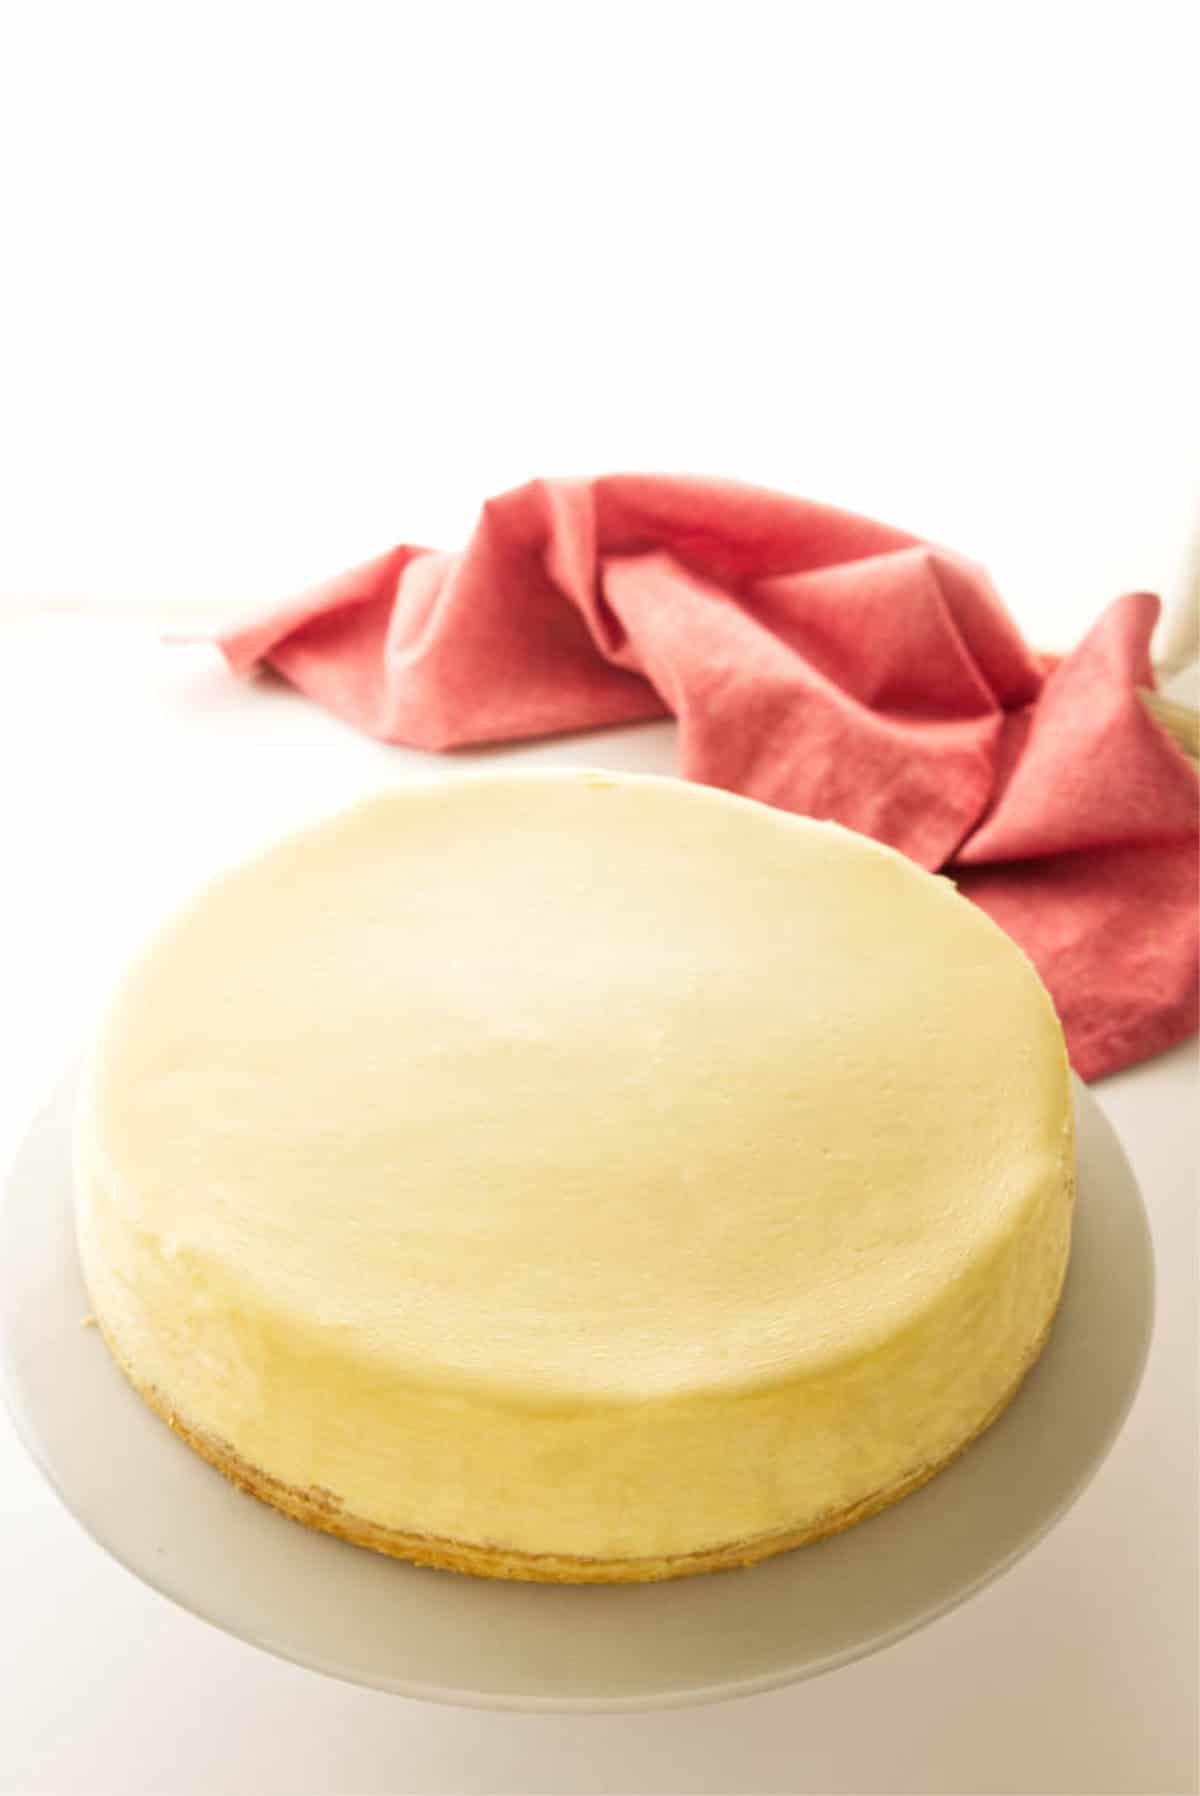 creamy, perfectly smooth topped cheesecake.